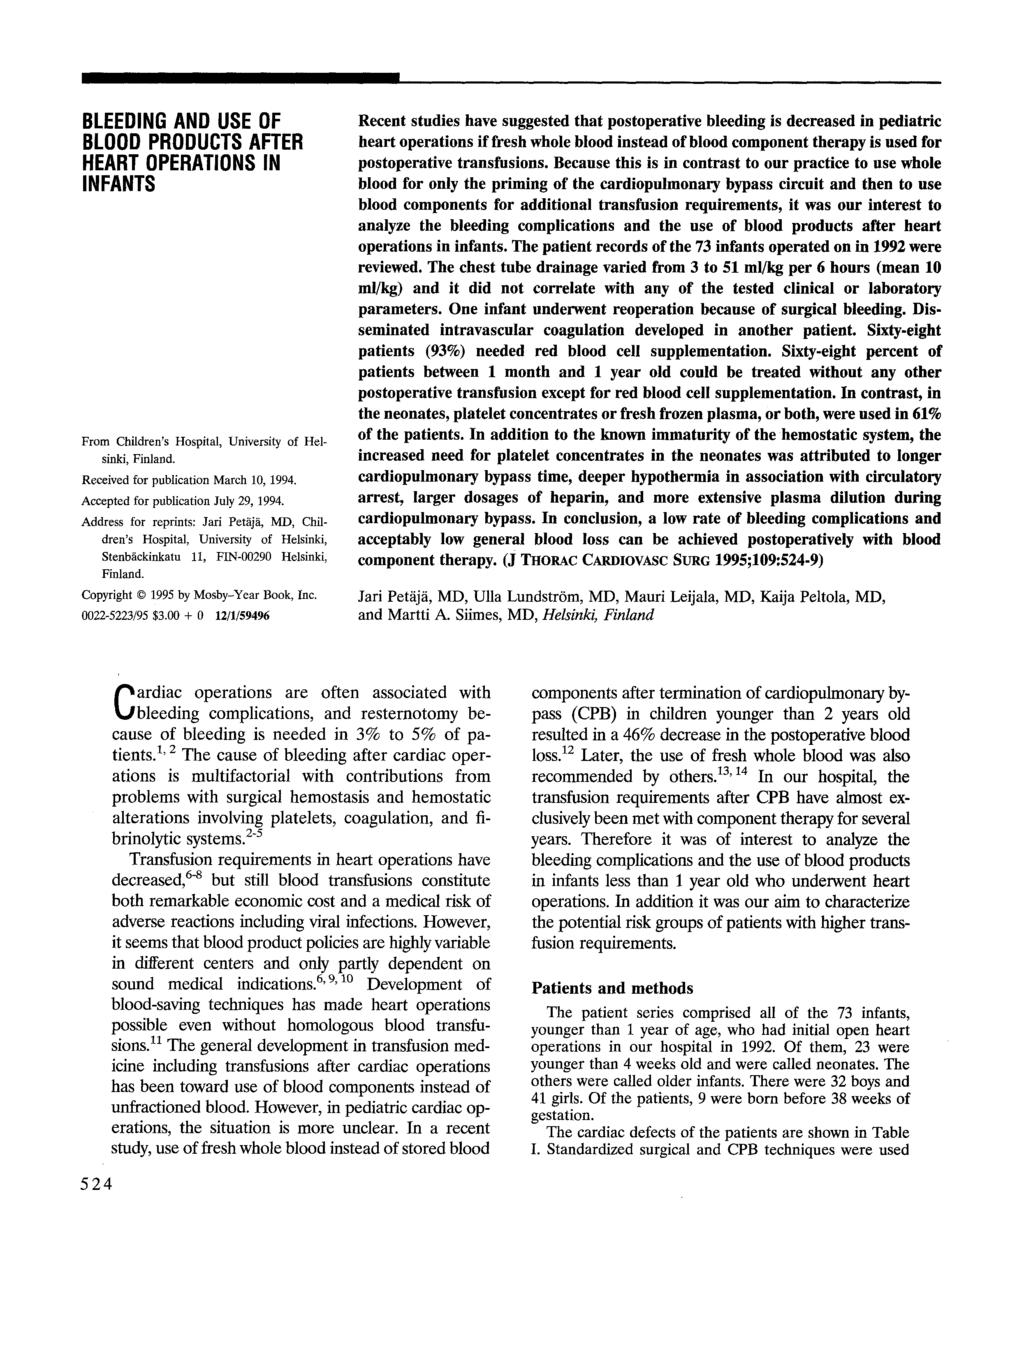 BLEEDING AND USE OF BLOOD PRODUCTS AFTER HEART OPERATIONS IN INFANTS From Children's Hospital, University of Helsinki, Finland. Received for publication March 10, 1994.